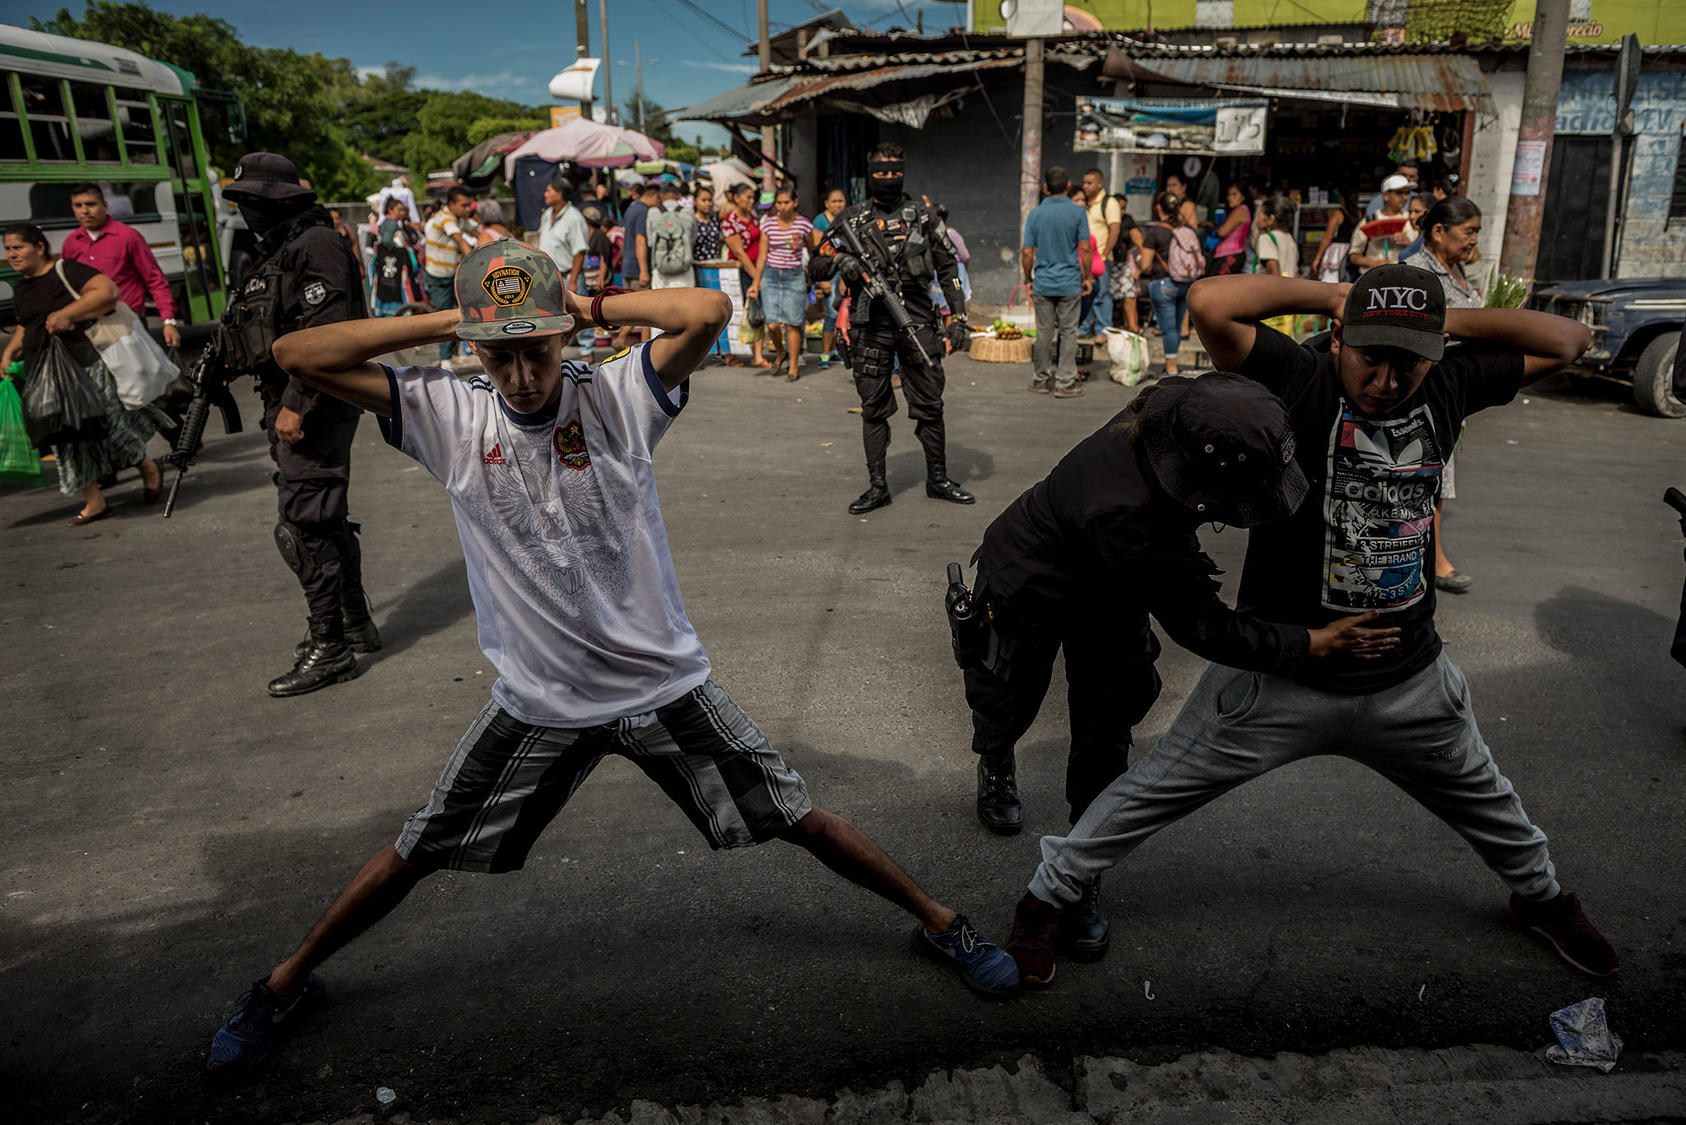 Police officers stop and search two men while patrolling the San Martín market, where frequent gang activity has been reported, in San Salvador, Aug. 26, 2018. (Meridith Kohut/The New York Times)